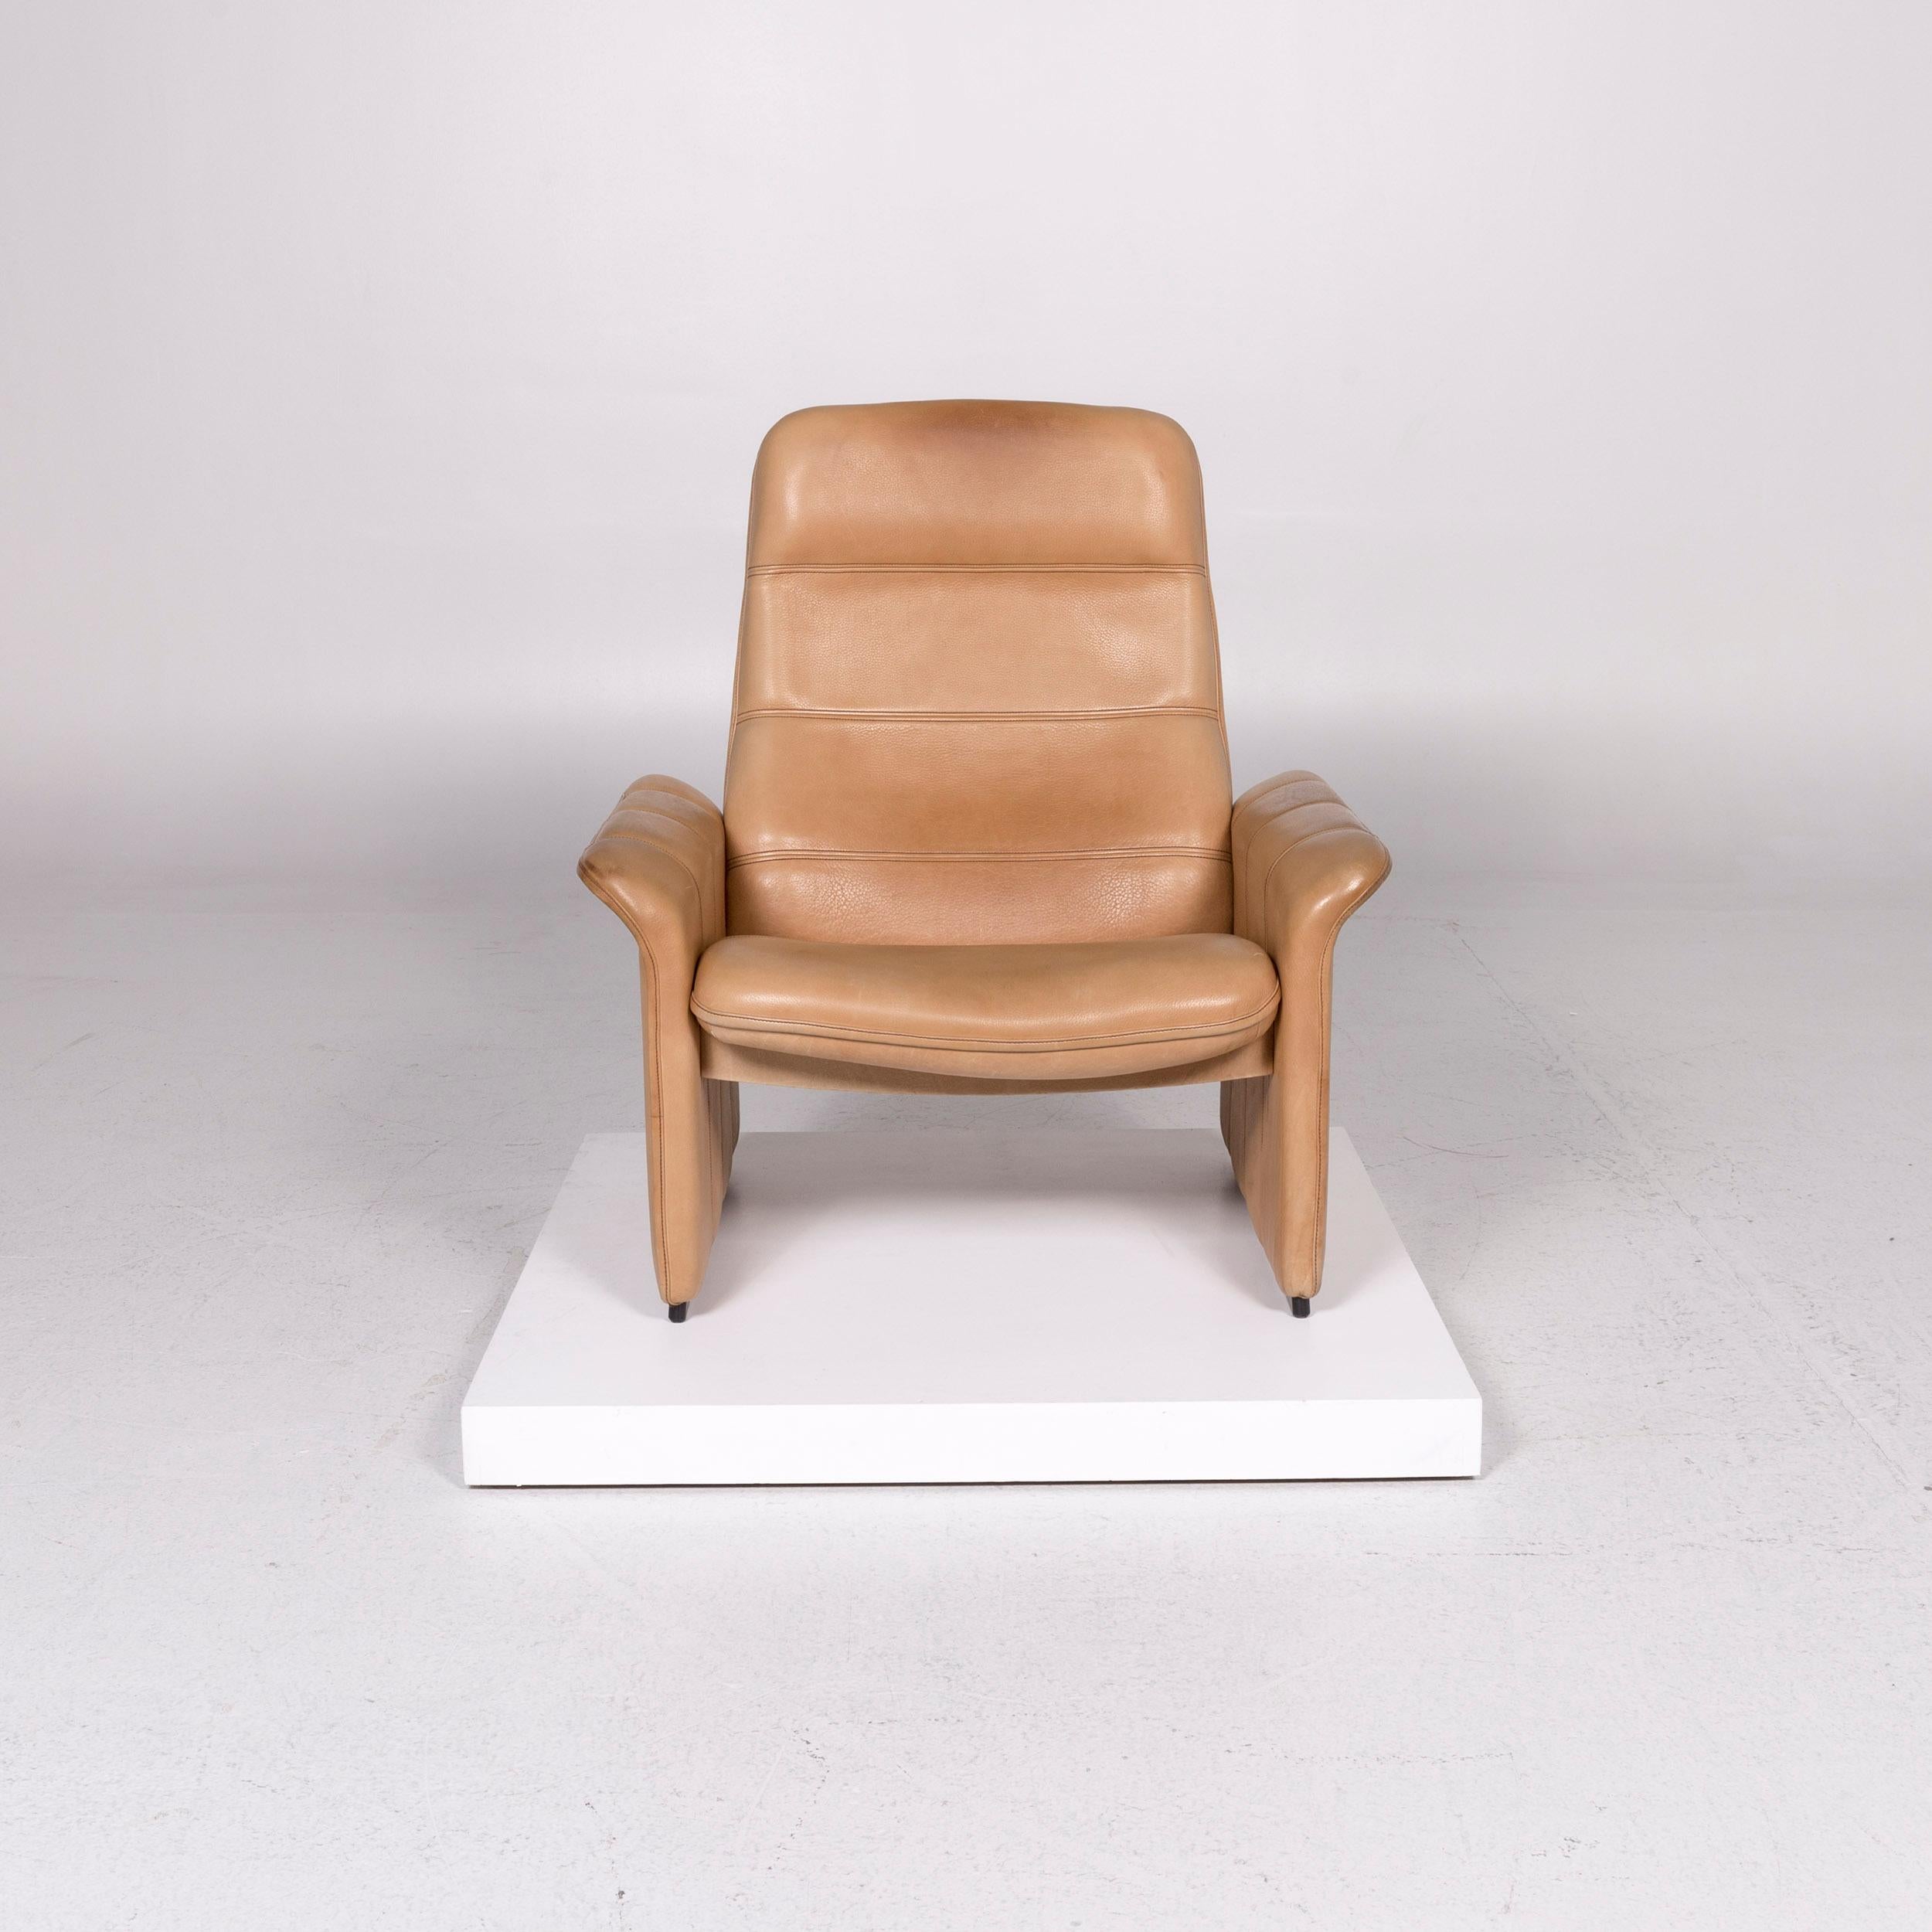 We bring to you a De Sede leather sea donkey set beige 1 armchair 1 stool.

Product measurements in centimetres:
 

Depth 80
Width 85
Height 95
Seat-height 40
Rest-height 50
Seat-depth 55
Seat-width 60
Back-height 61.

 